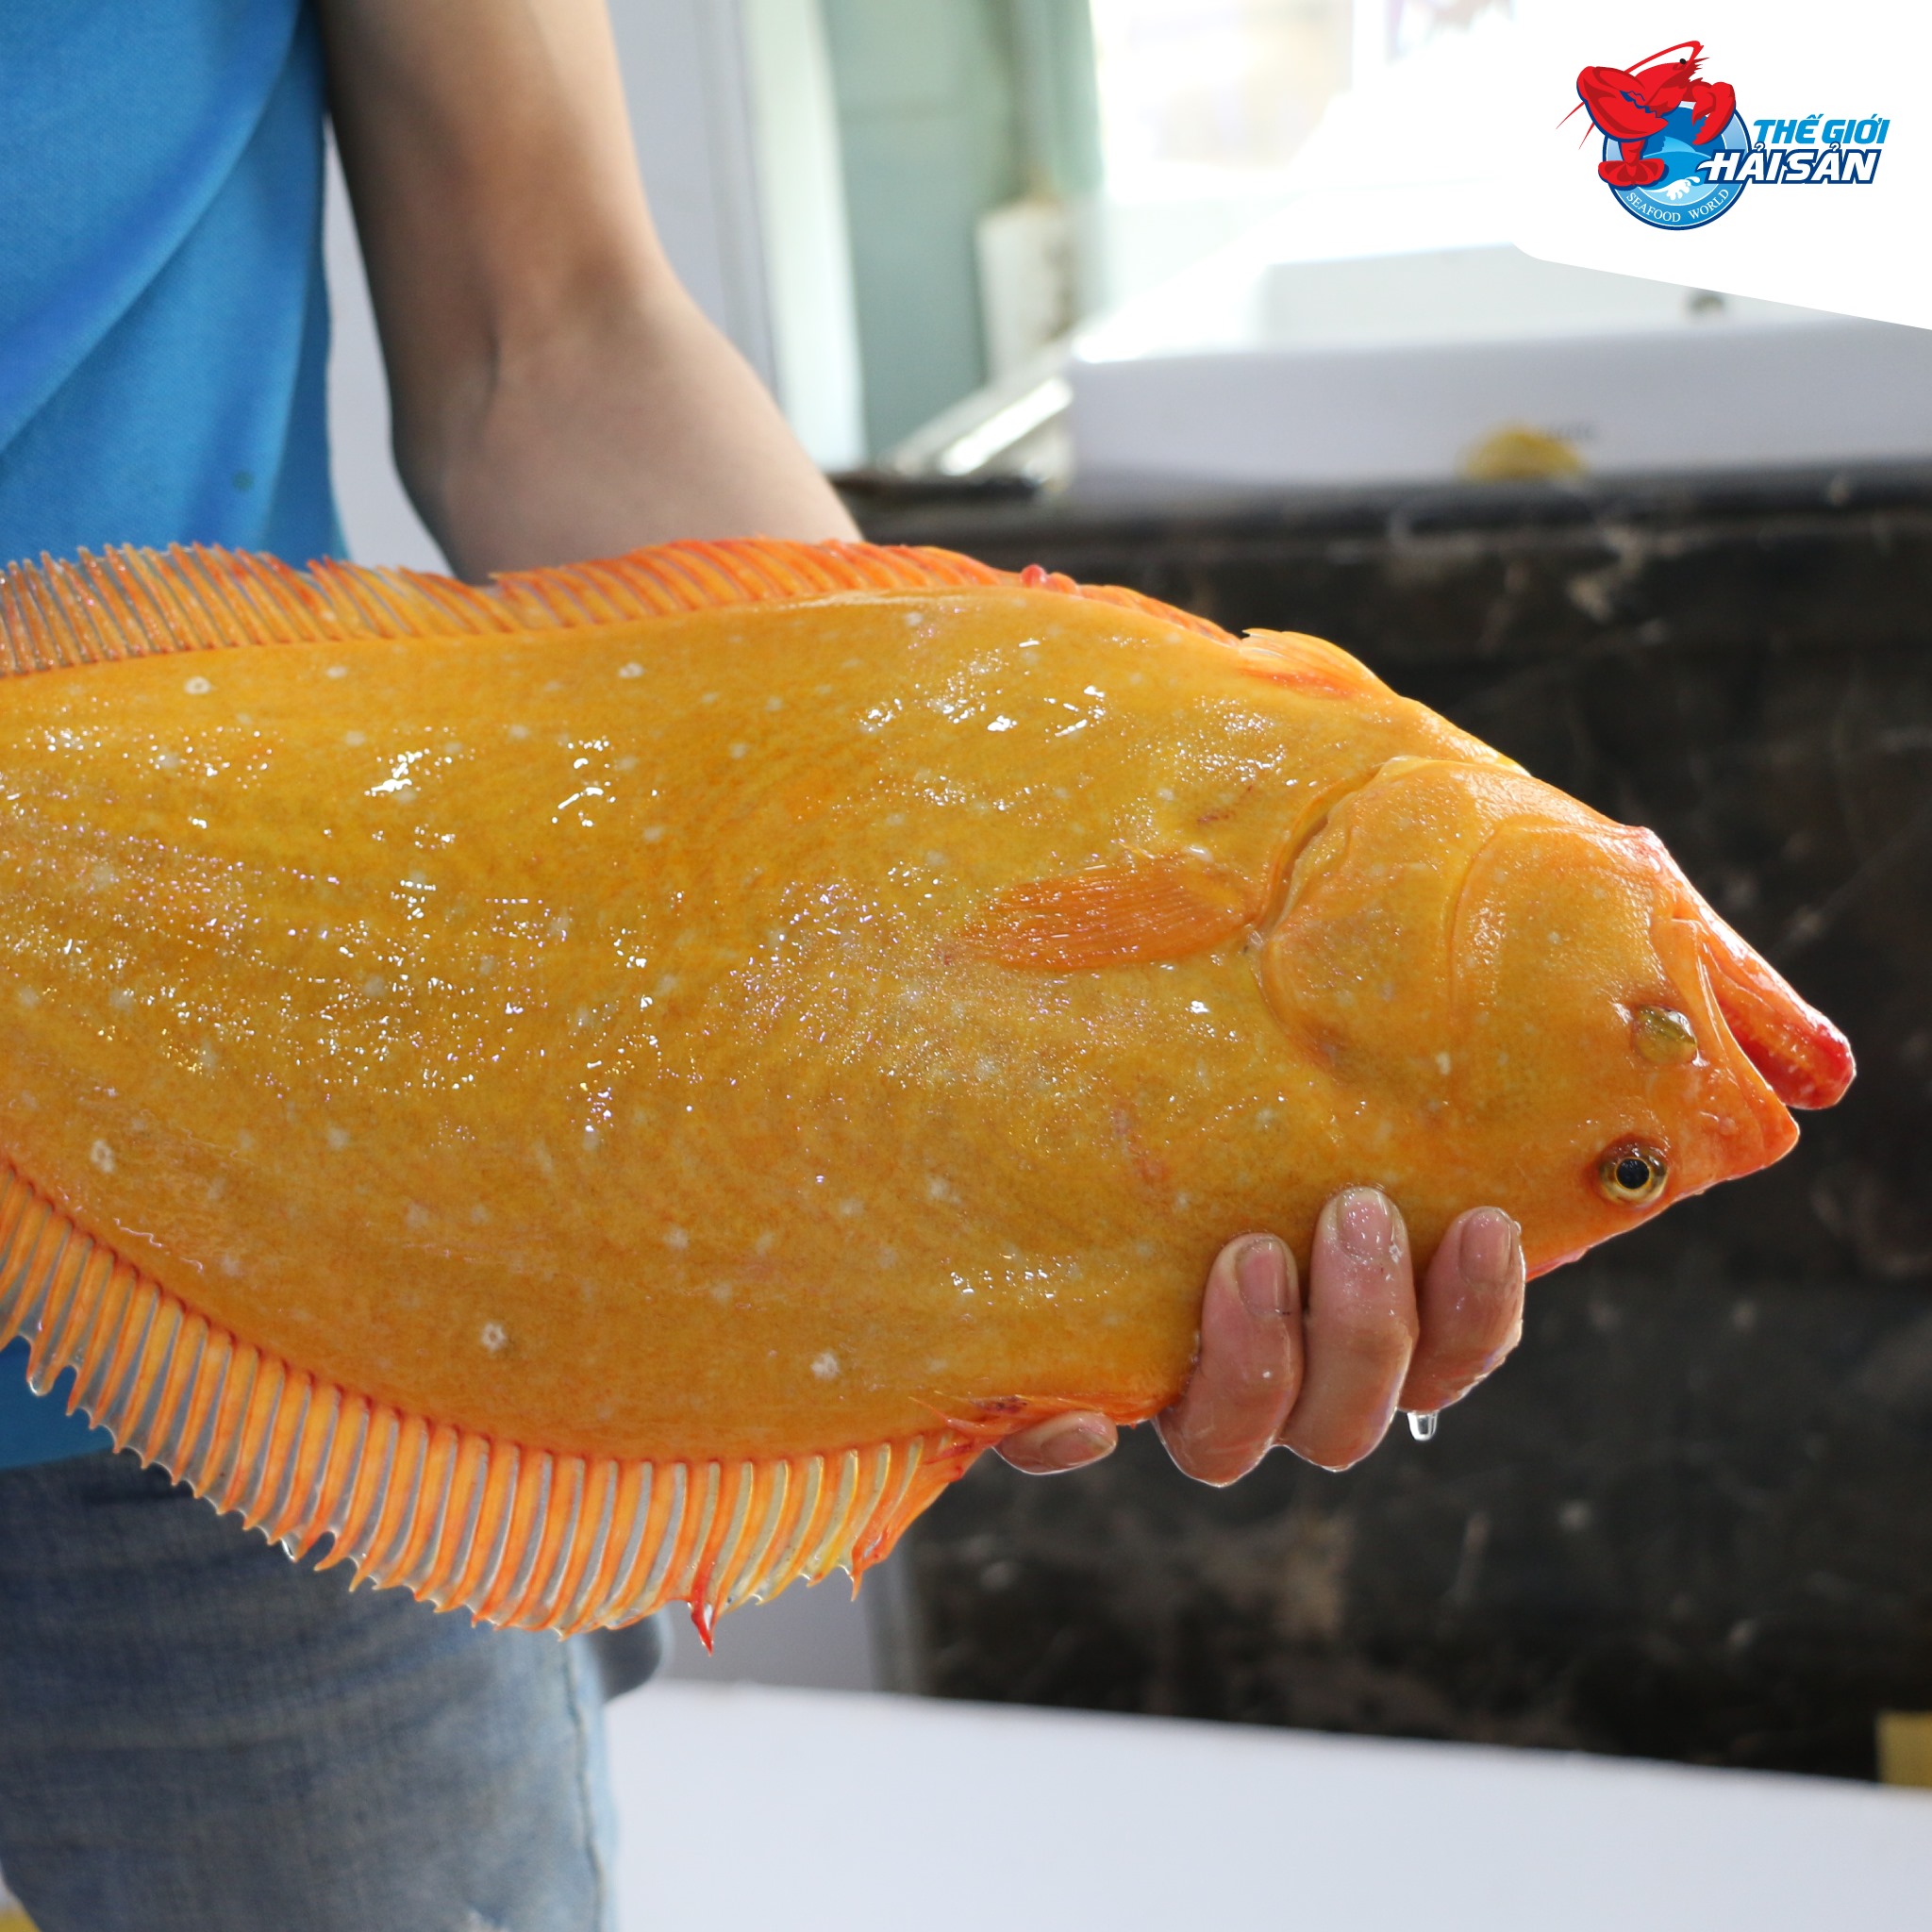 The golden flounder is like a sparkling gold bar of the sea